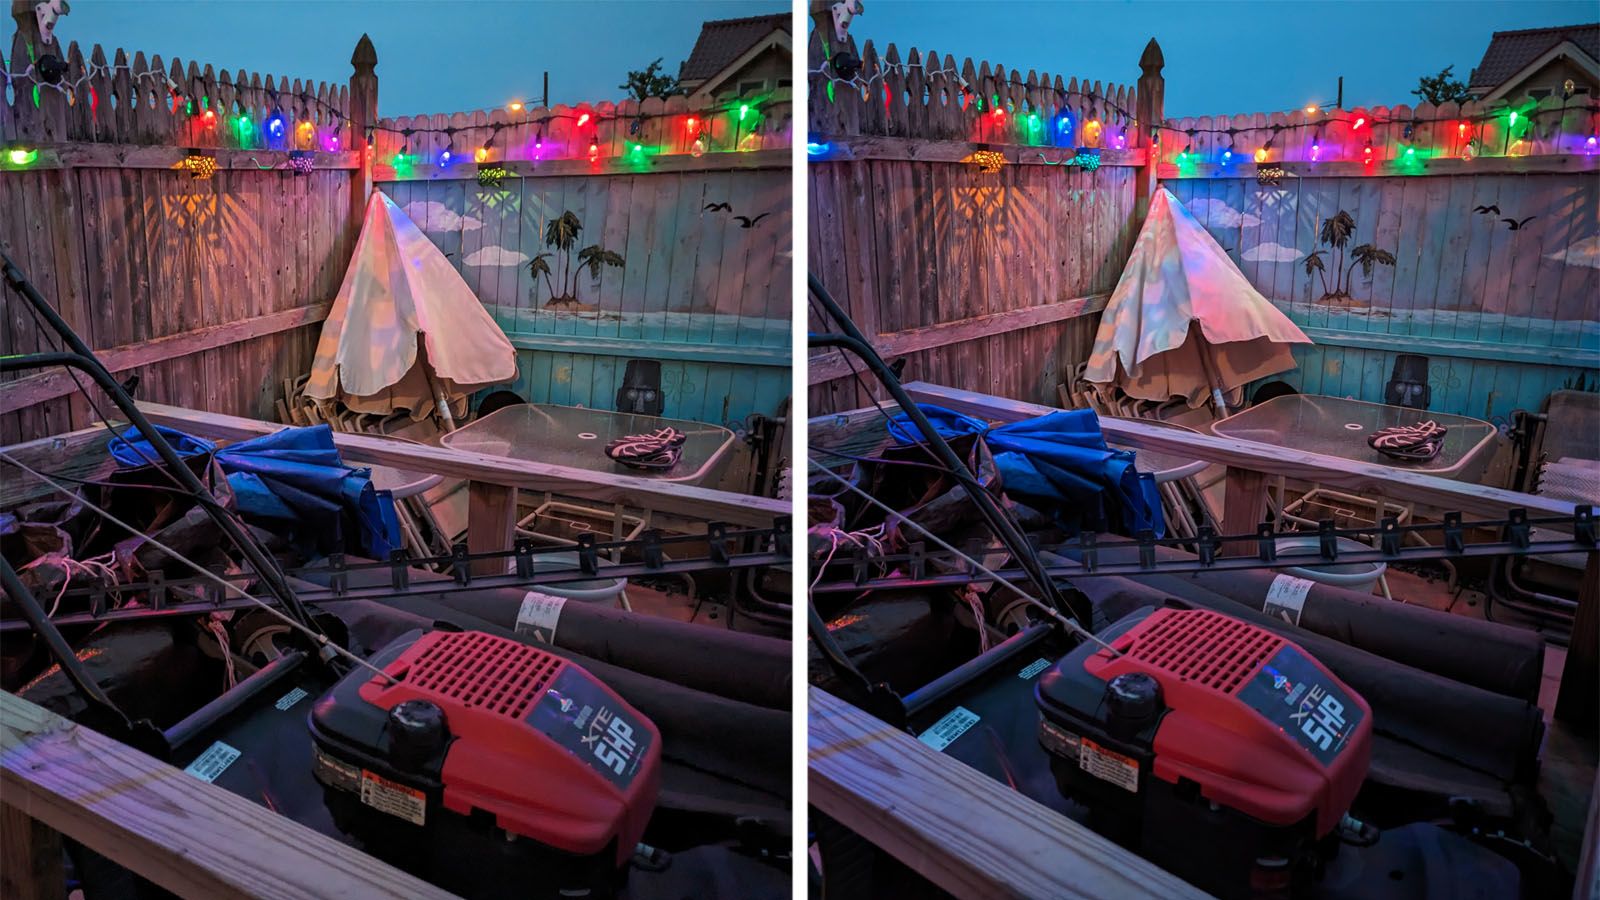 The image taken on the Pixel 7a (left) is barely distinguishable from the image taken on the Pixel 7 (right).